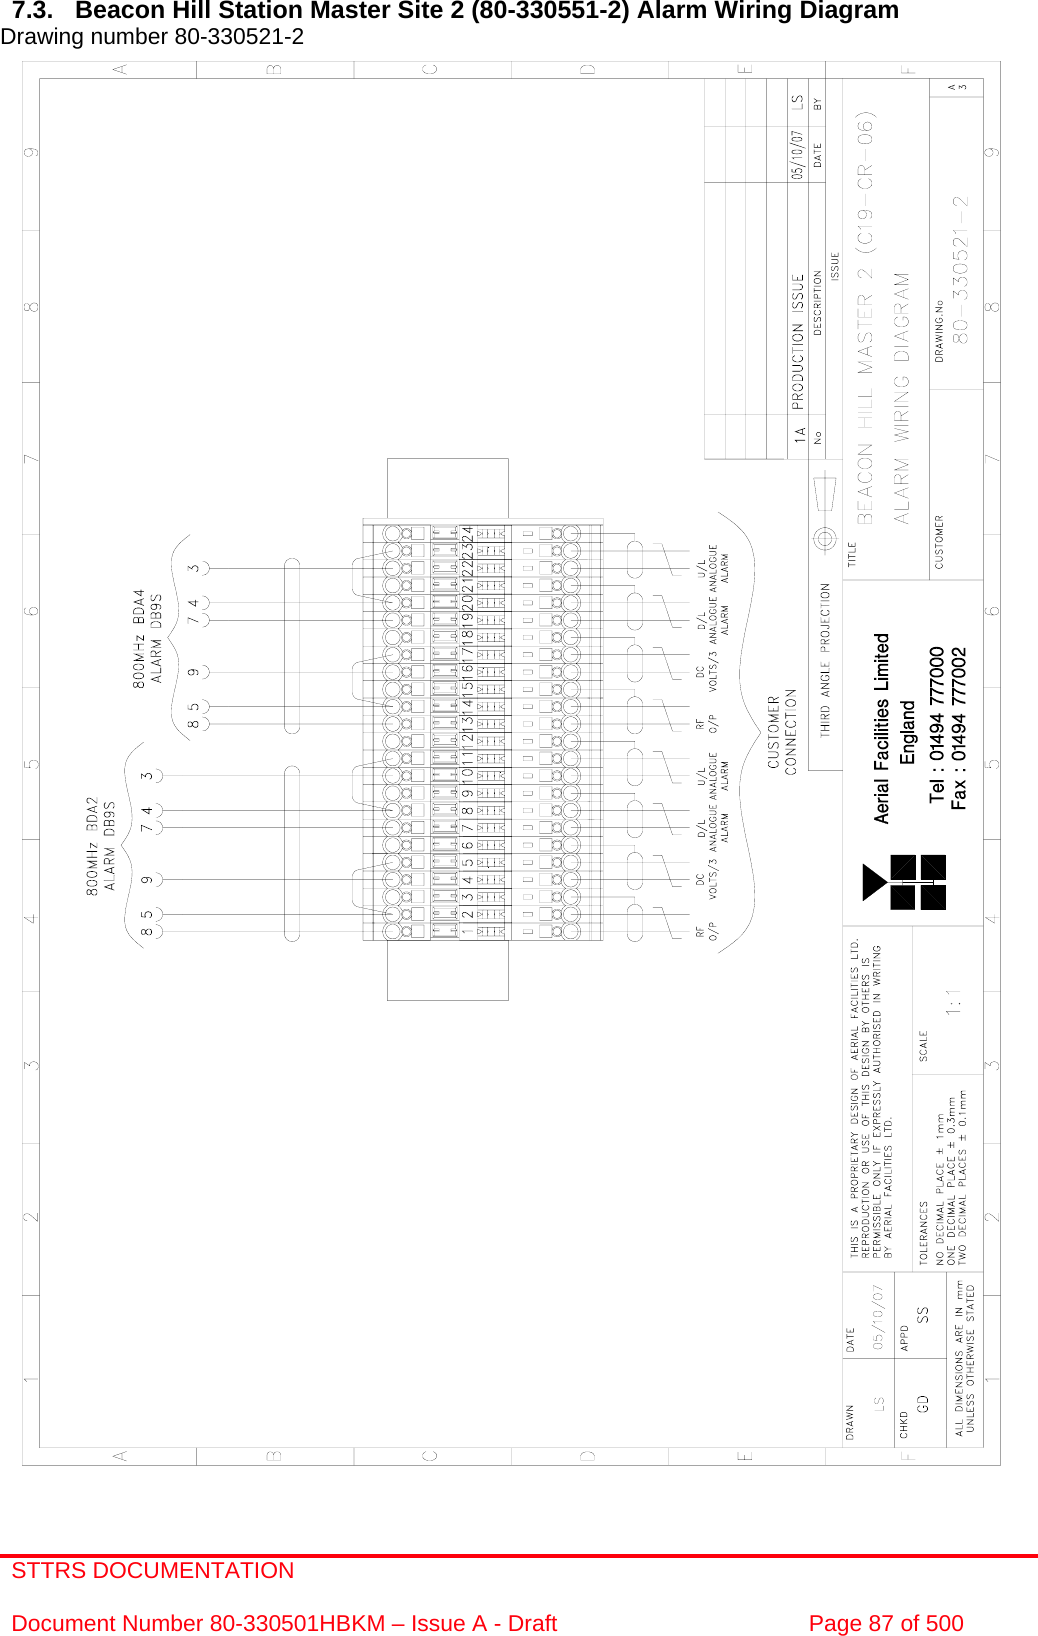 STTRS DOCUMENTATION  Document Number 80-330501HBKM – Issue A - Draft  Page 87 of 500   7.3.  Beacon Hill Station Master Site 2 (80-330551-2) Alarm Wiring Diagram Drawing number 80-330521-2                                                        